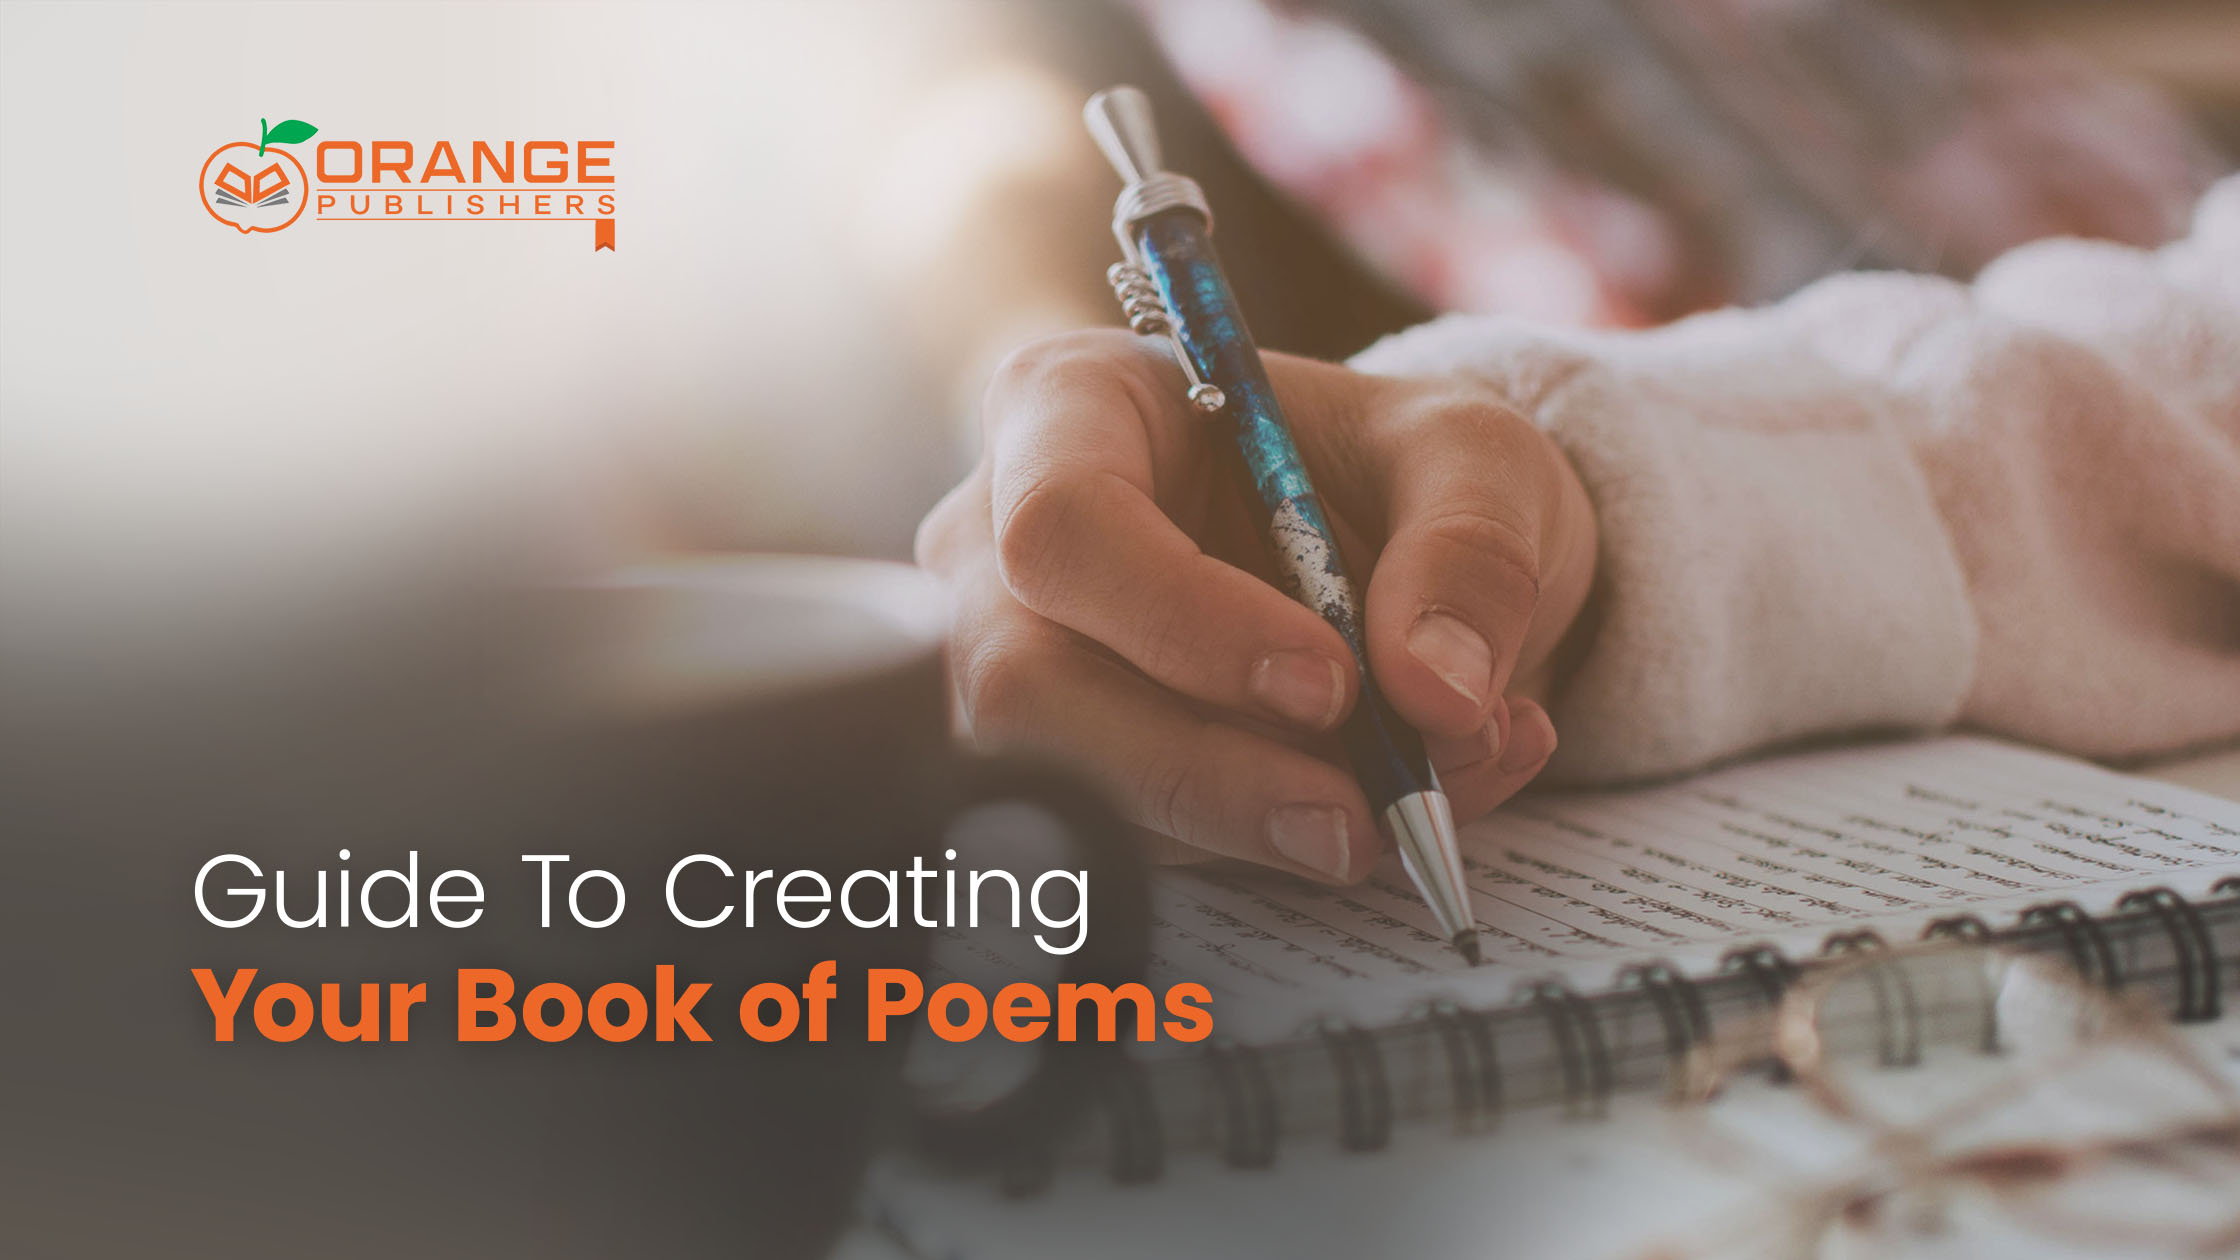 Guide To Creating Your Book of Poems: Publish and Market